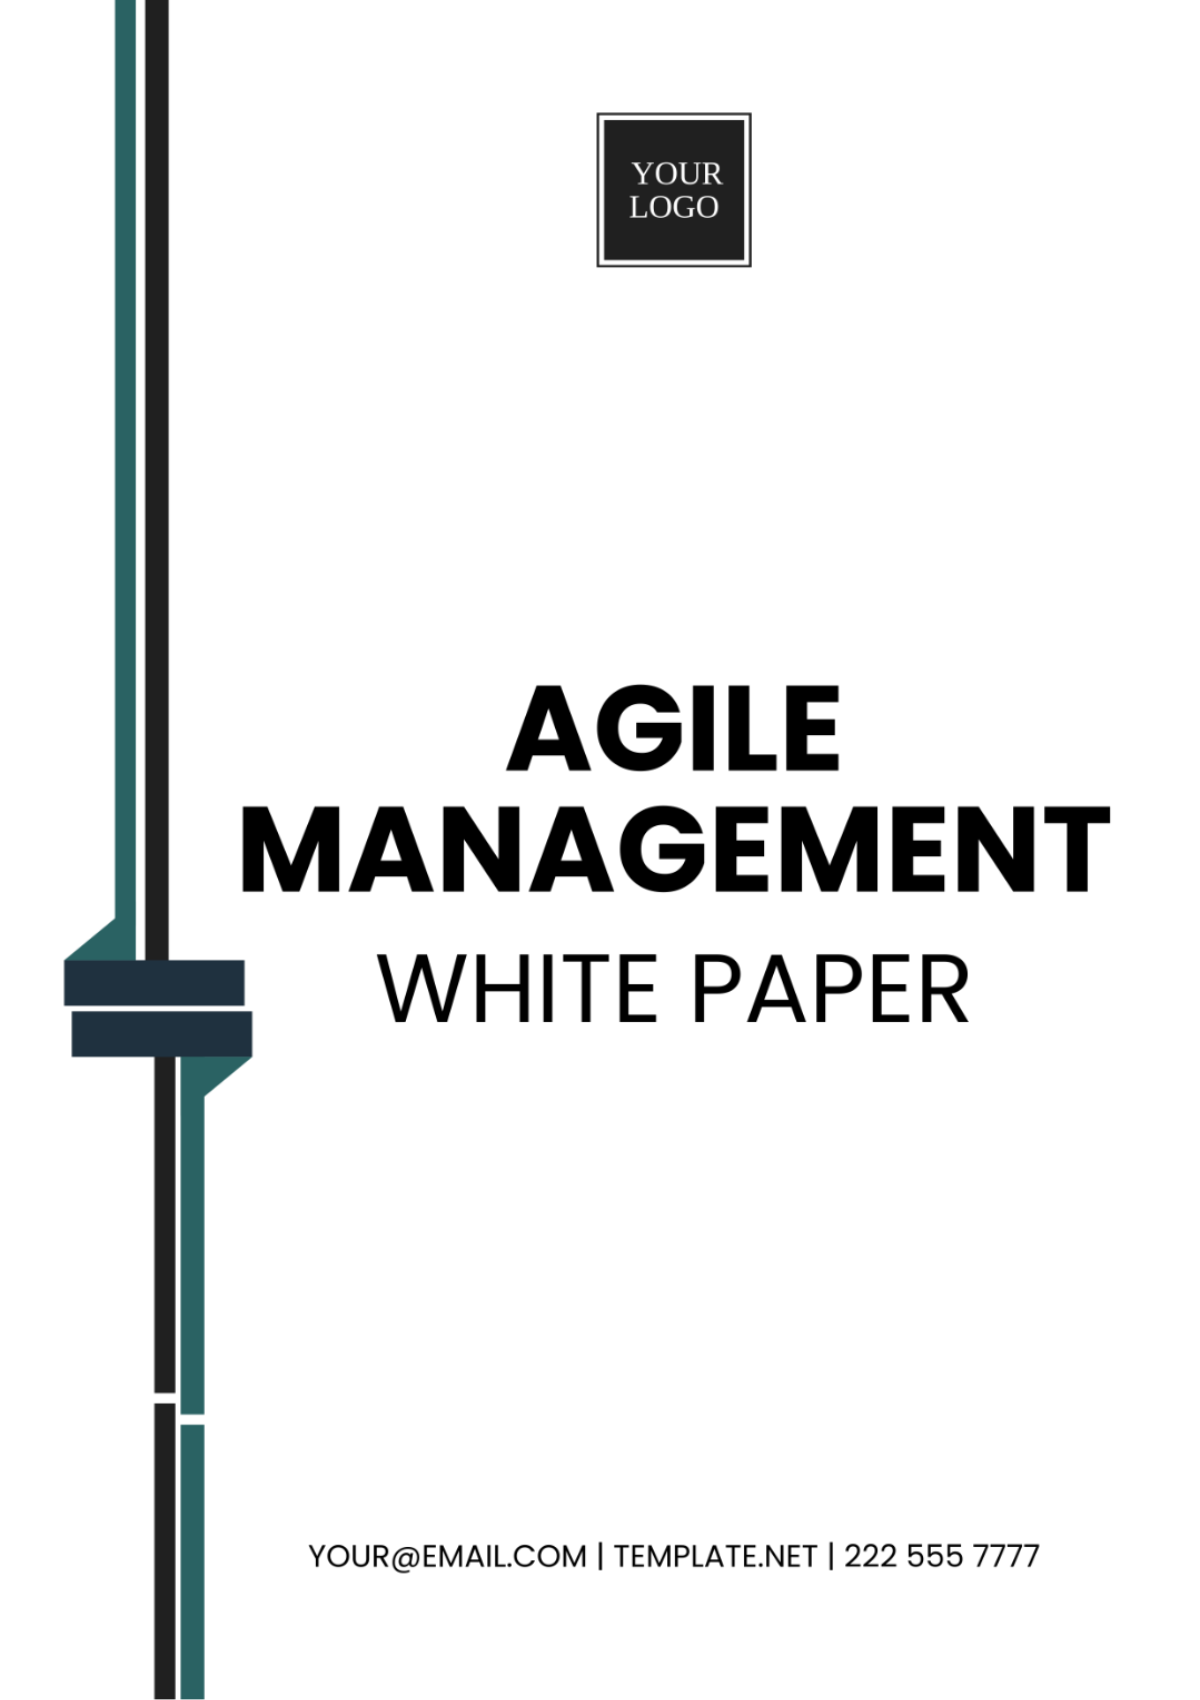 Agile Management White Paper Template